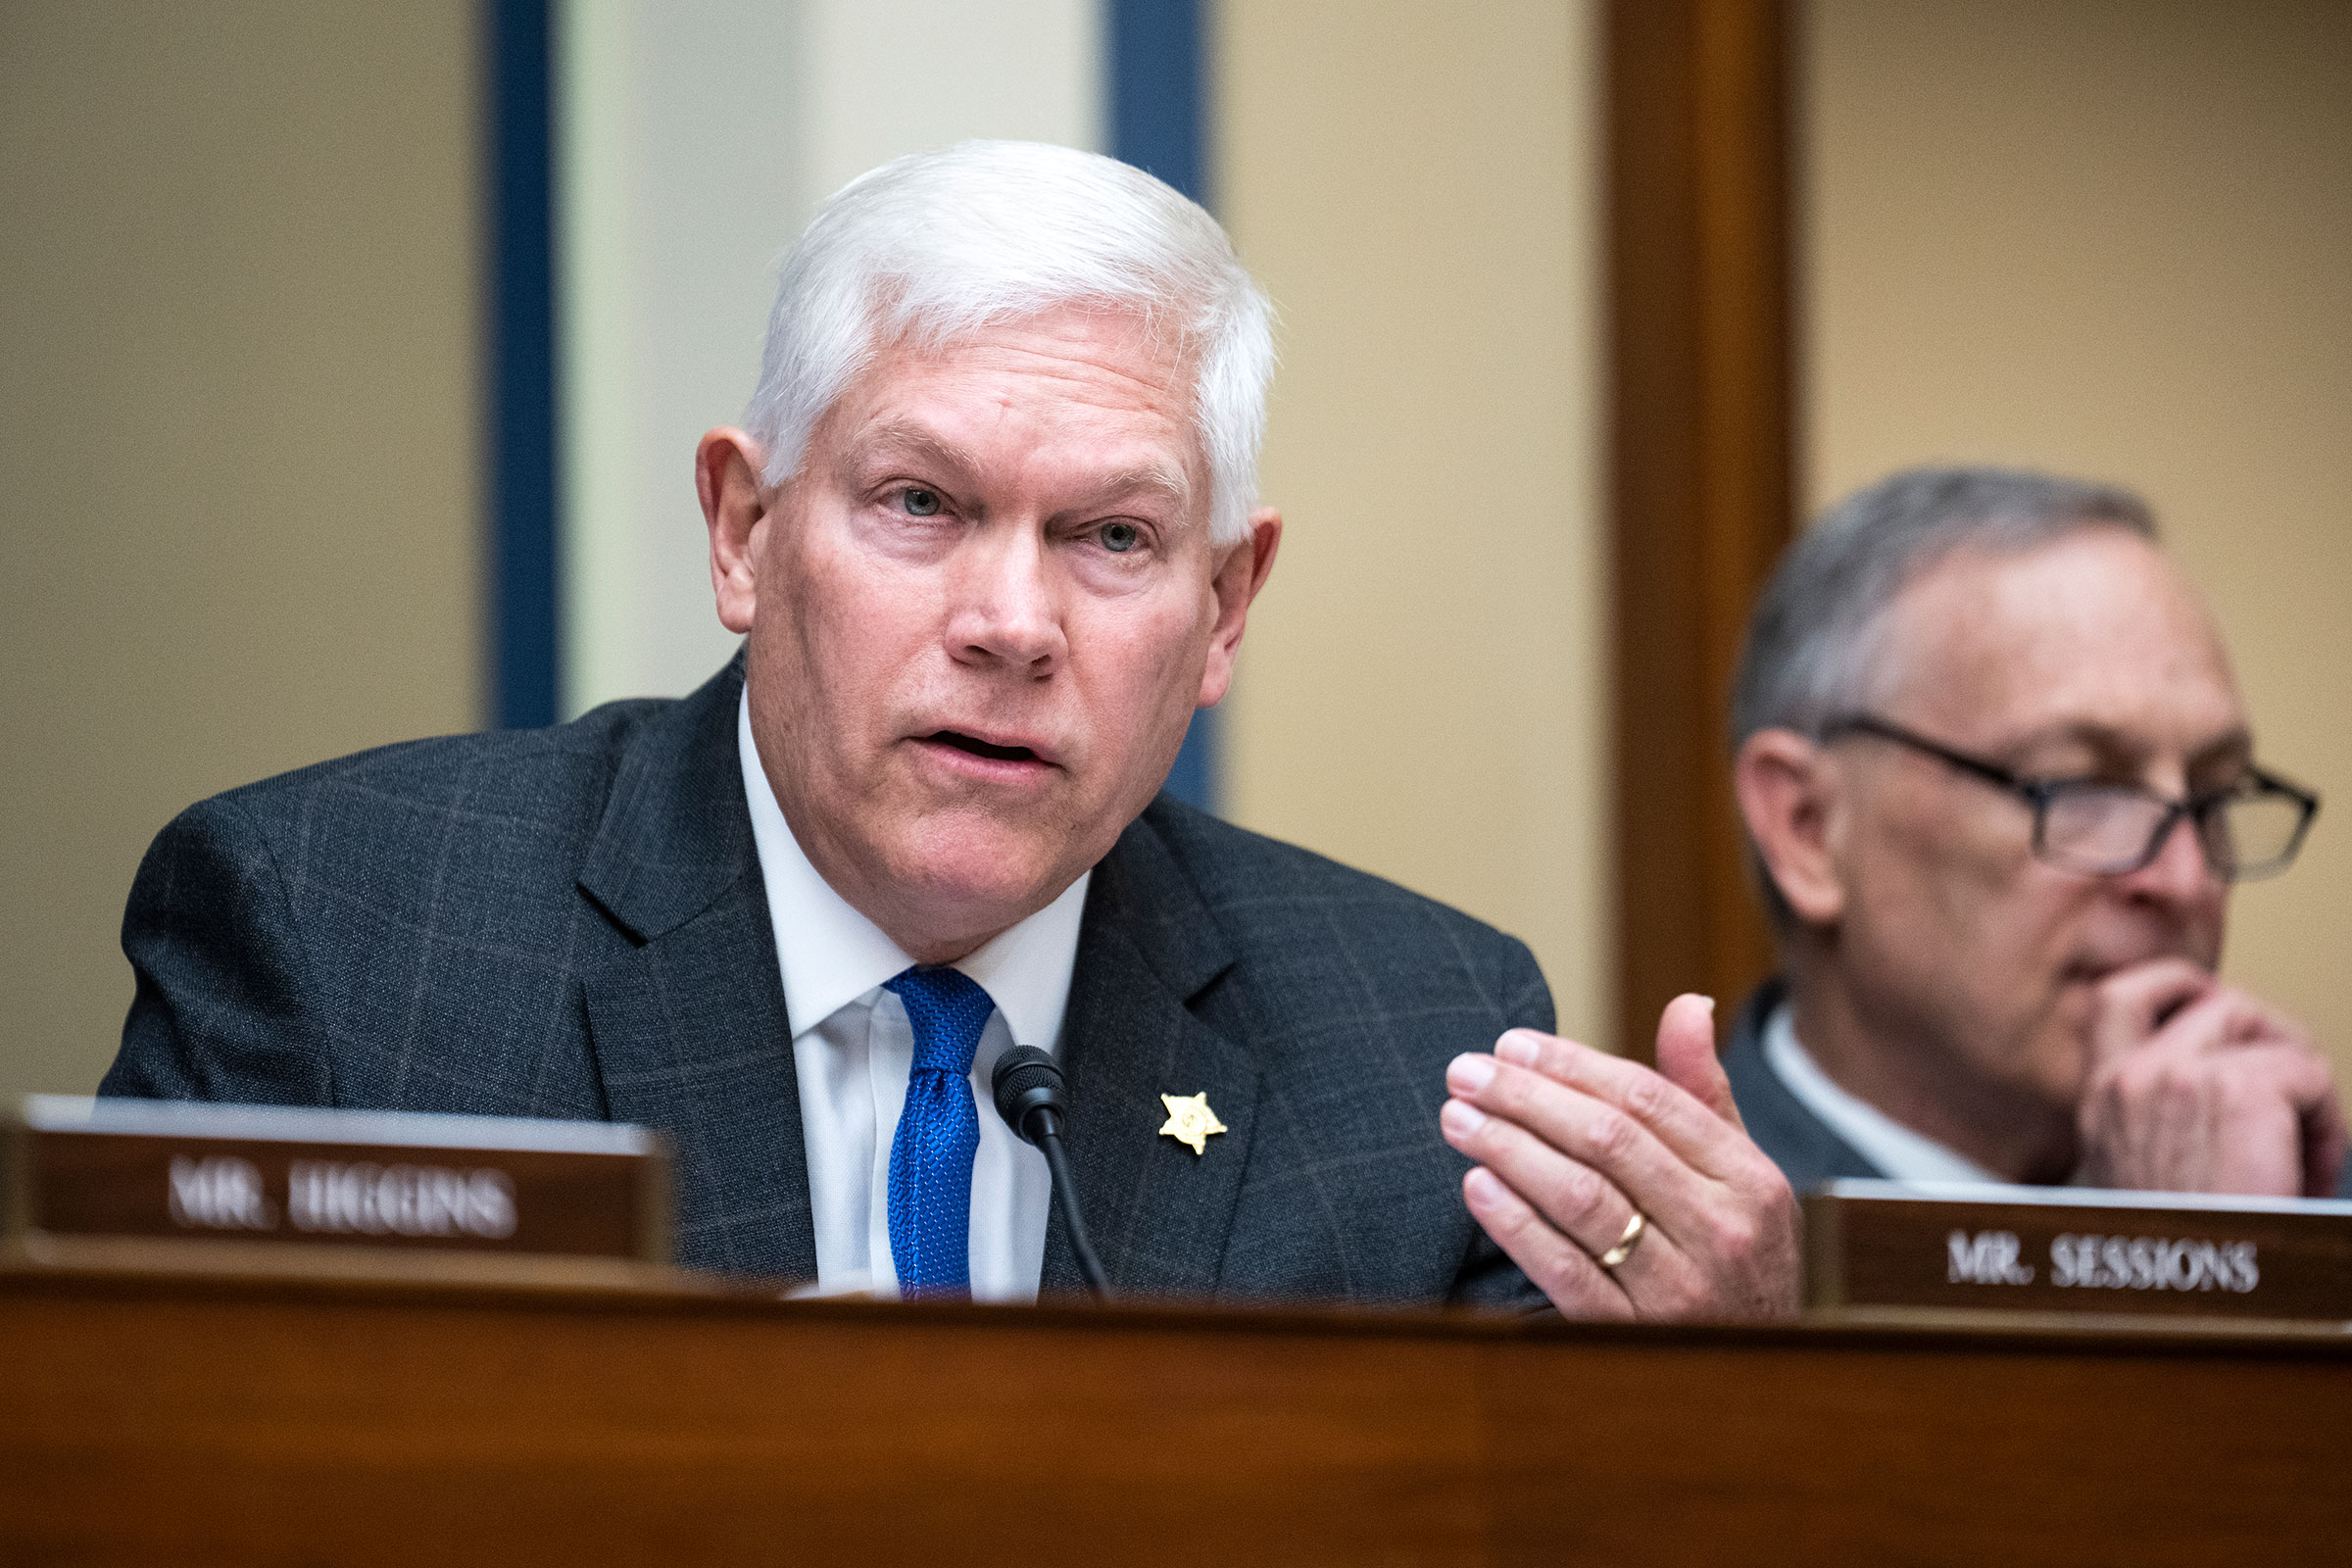 Rep. Pete Sessions during the House Oversight and Accountability Committee hearing on Thursday, March 9.